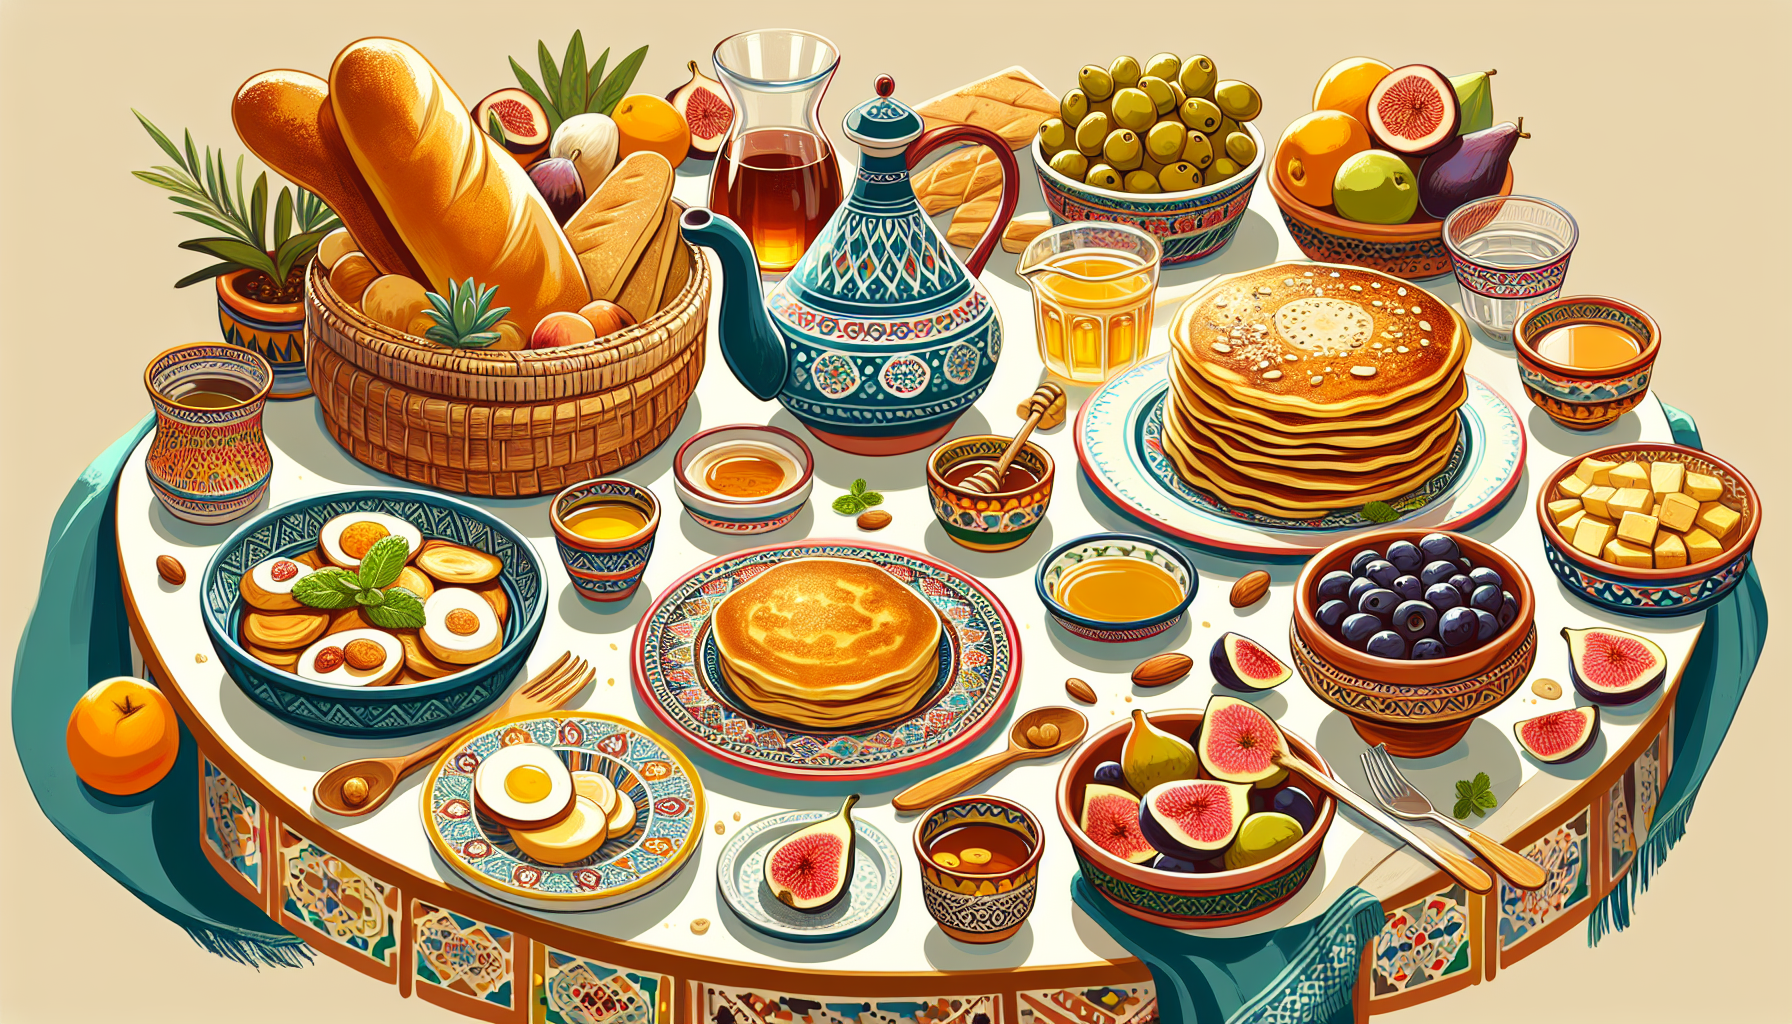 Whats Your Favorite Moroccan Breakfast Recipe For A Flavorful Start To The Day?